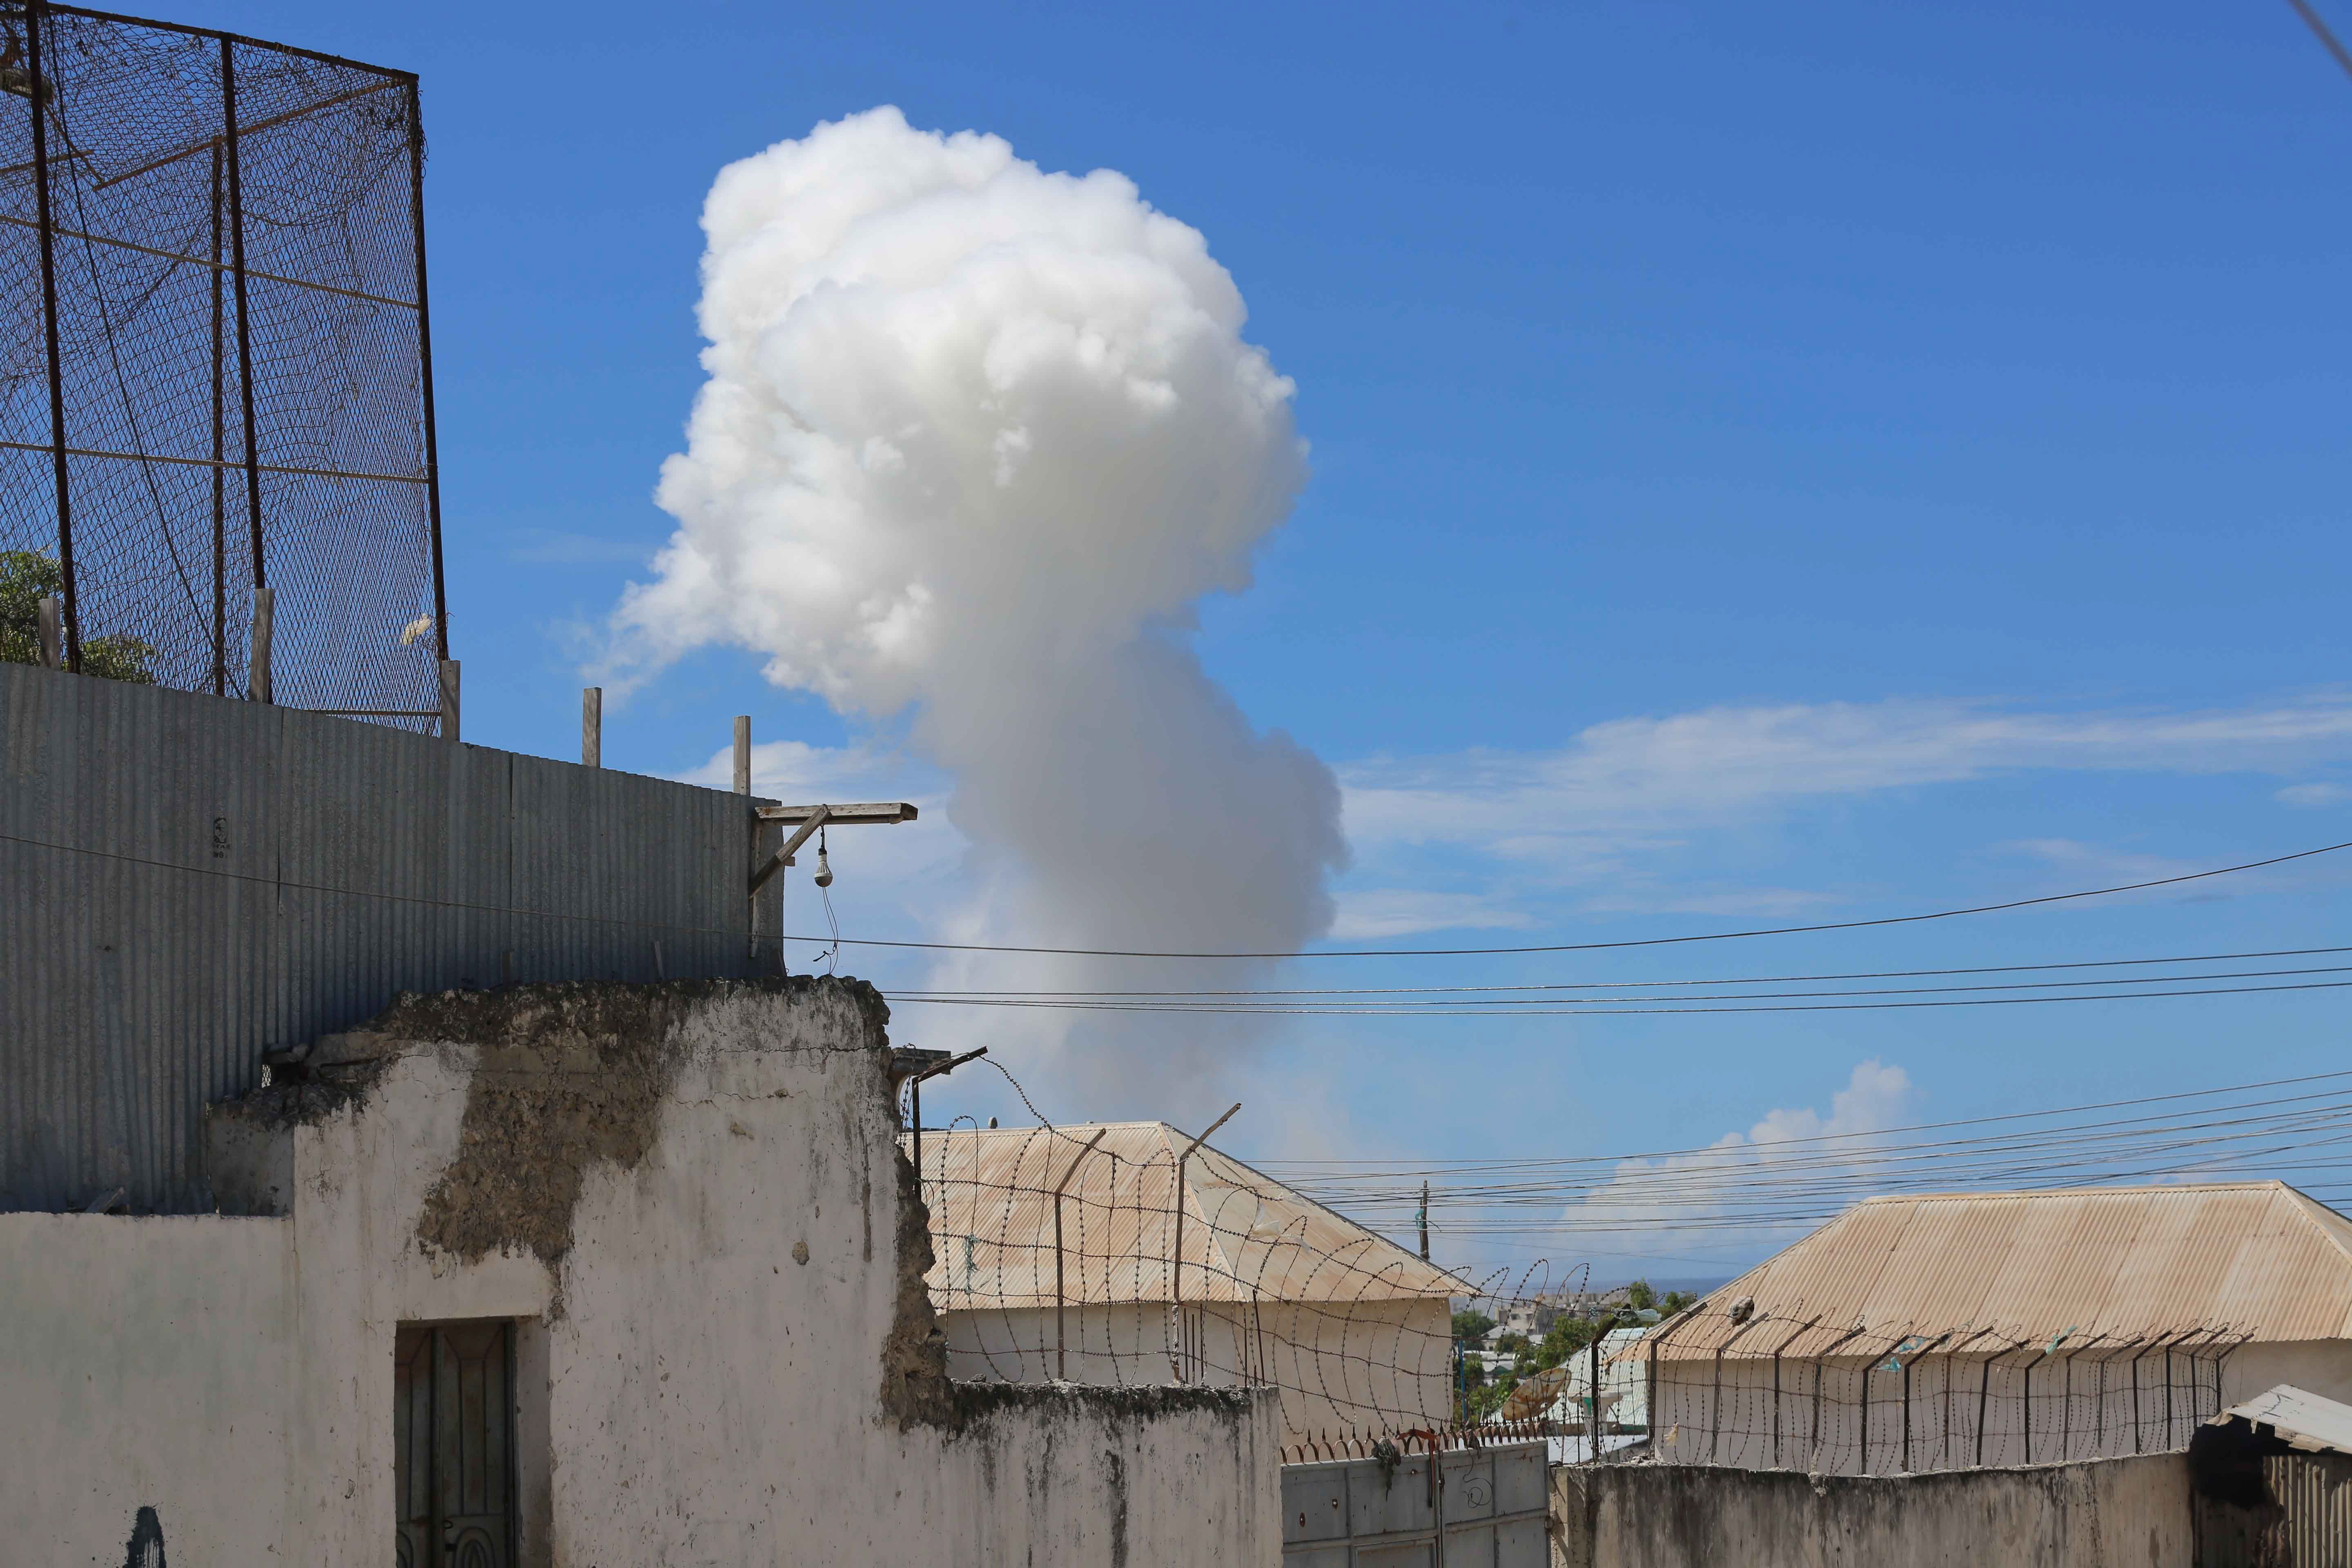 epa07591081 Smoke billows from a suspected explosion in  Mogadishu, Somalia, 22 May 2019. According to initial reports, a blast allegedly occured at a security checkpoint near the Presidential Palace.  EPA/SAID YUSUF WARSAME